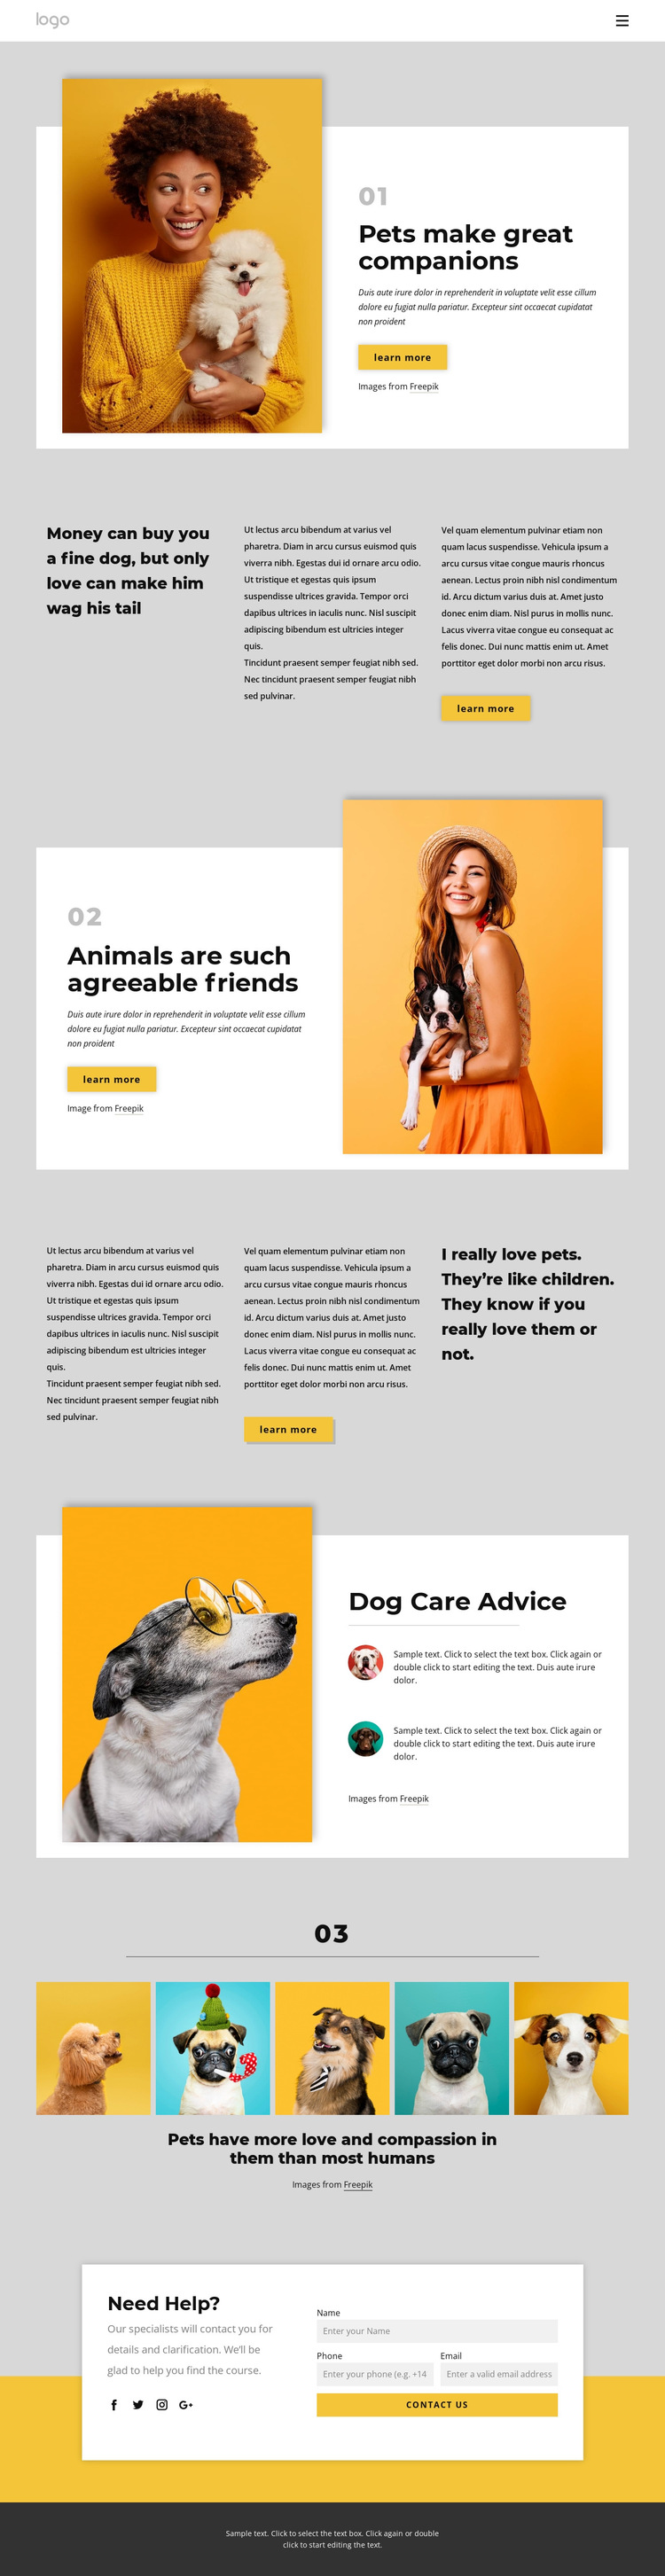 Why pets make us happier HTML5 Template